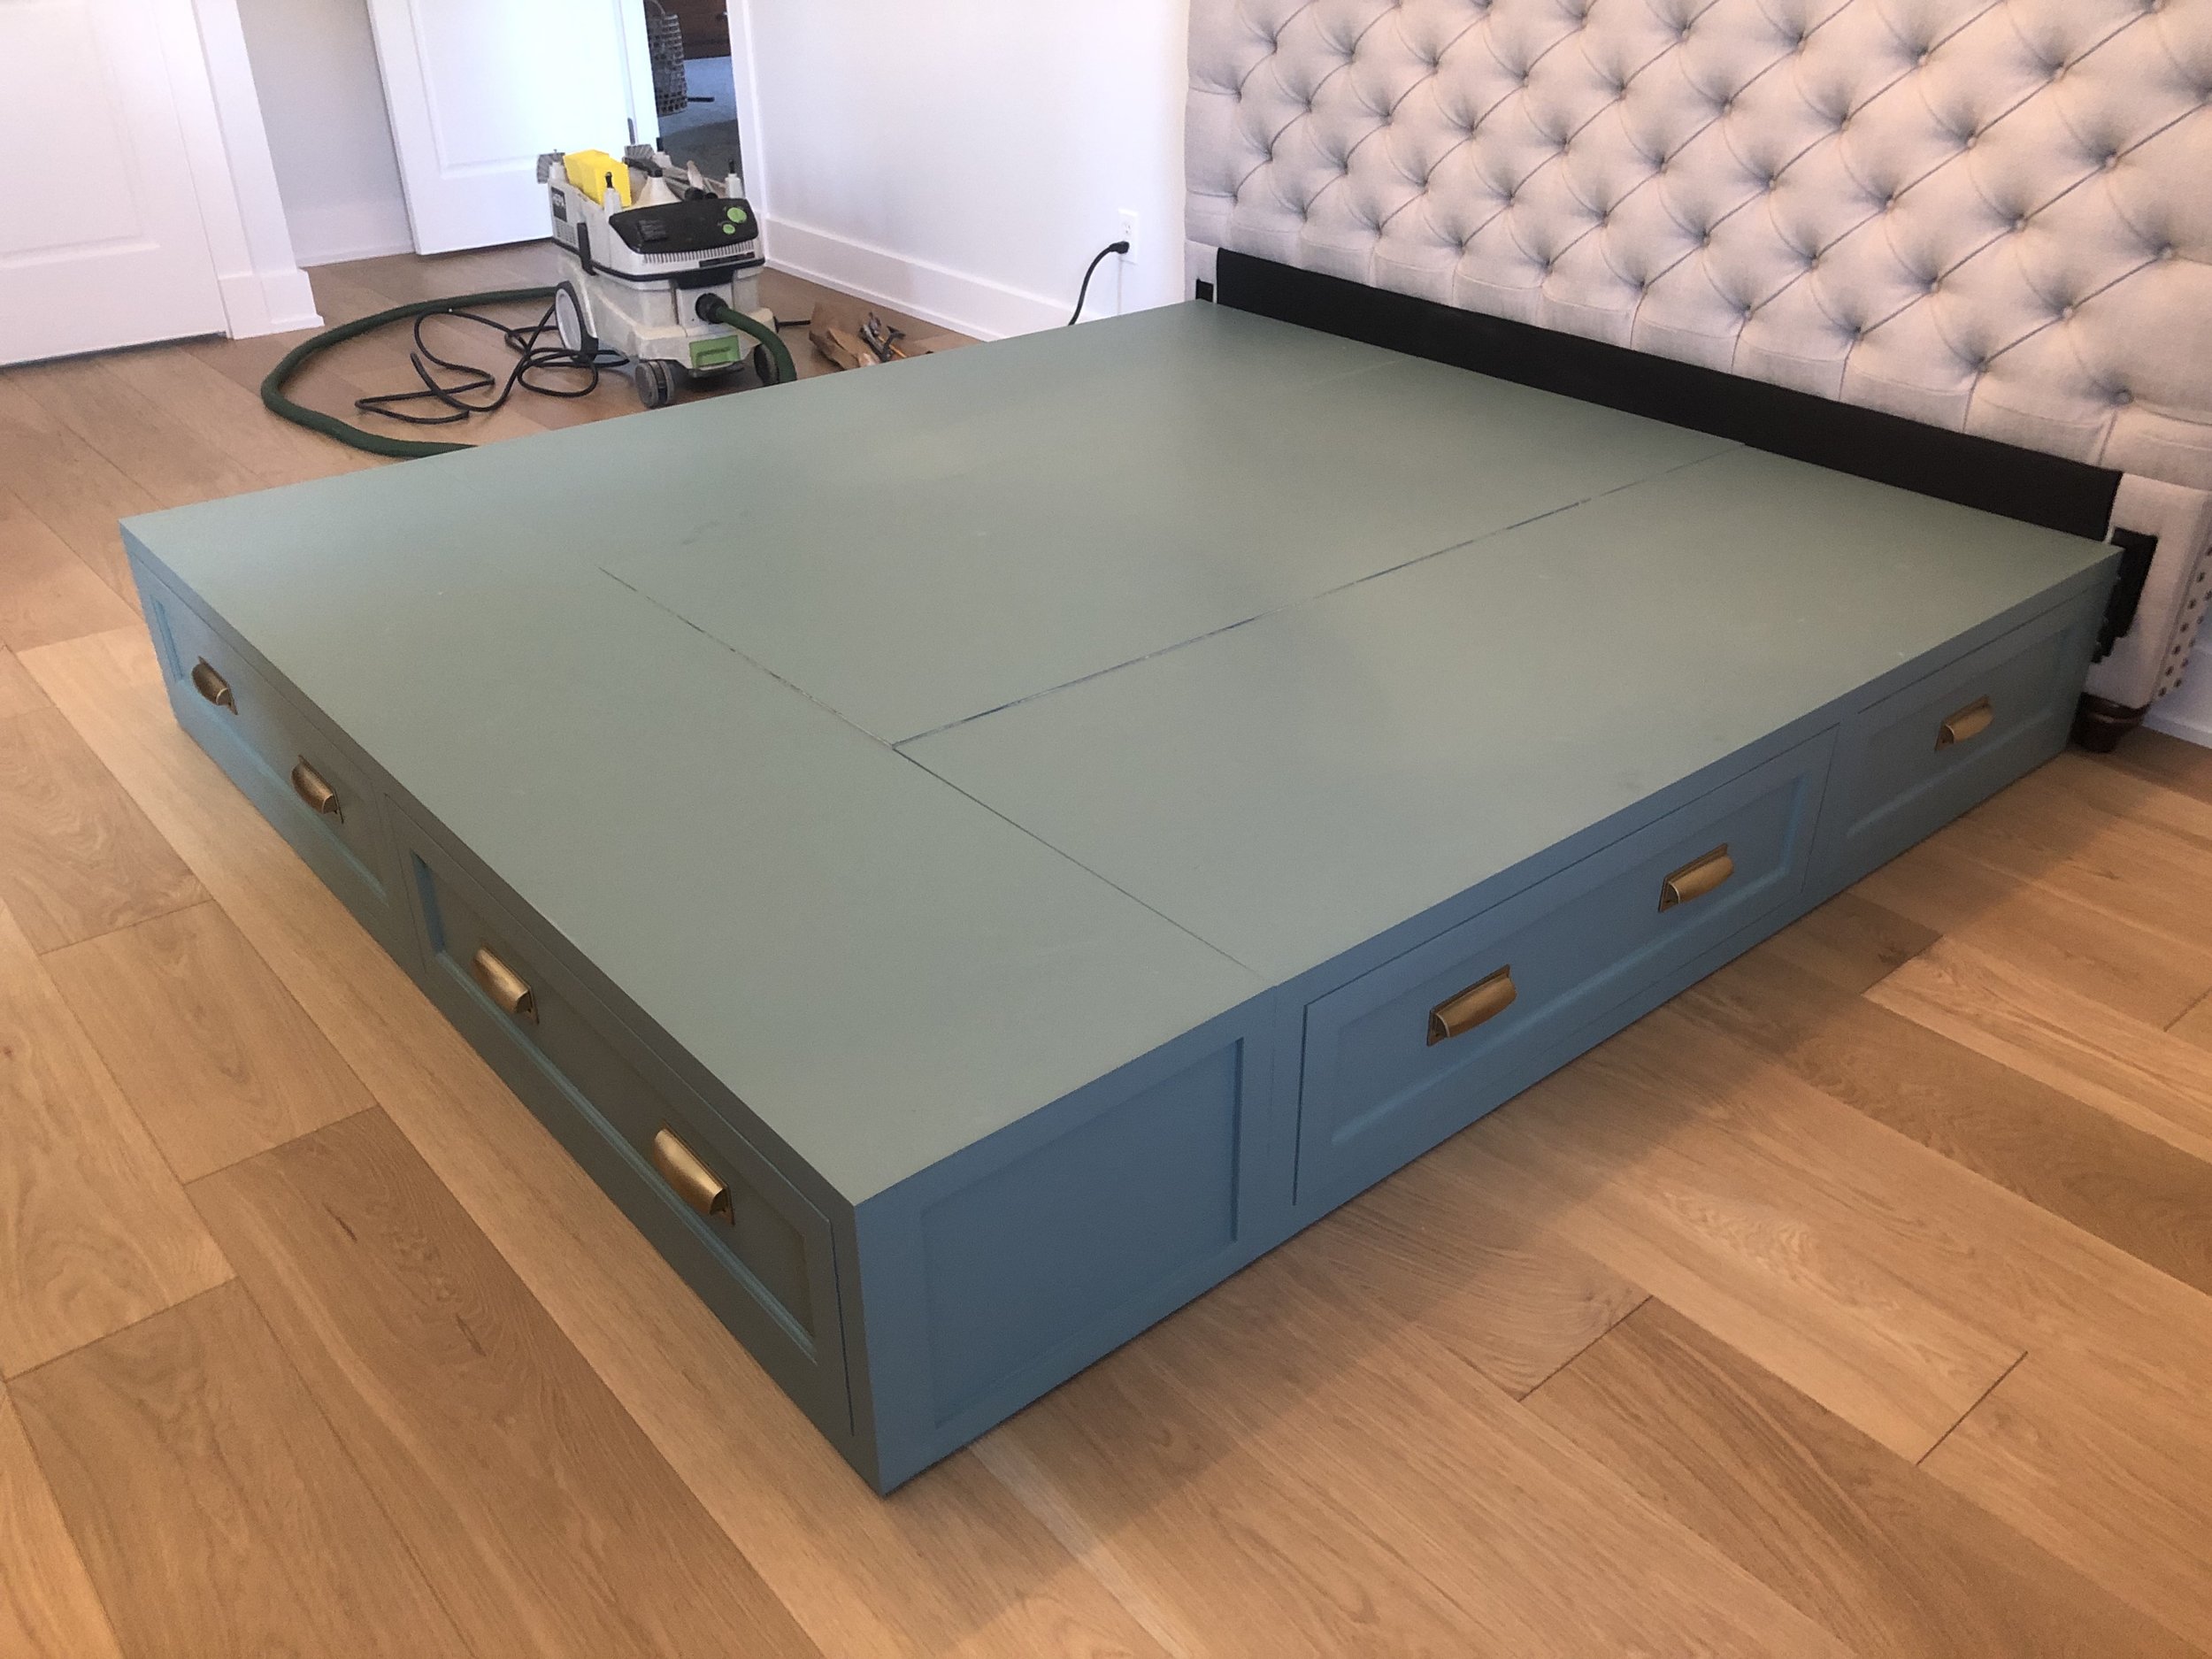  As part of  this  project, the client asked me to also create a storage platform for under their bed. For some reason I didn’t get any photos during the construction phase, the only ones I have start with this one taken during installation. The plat